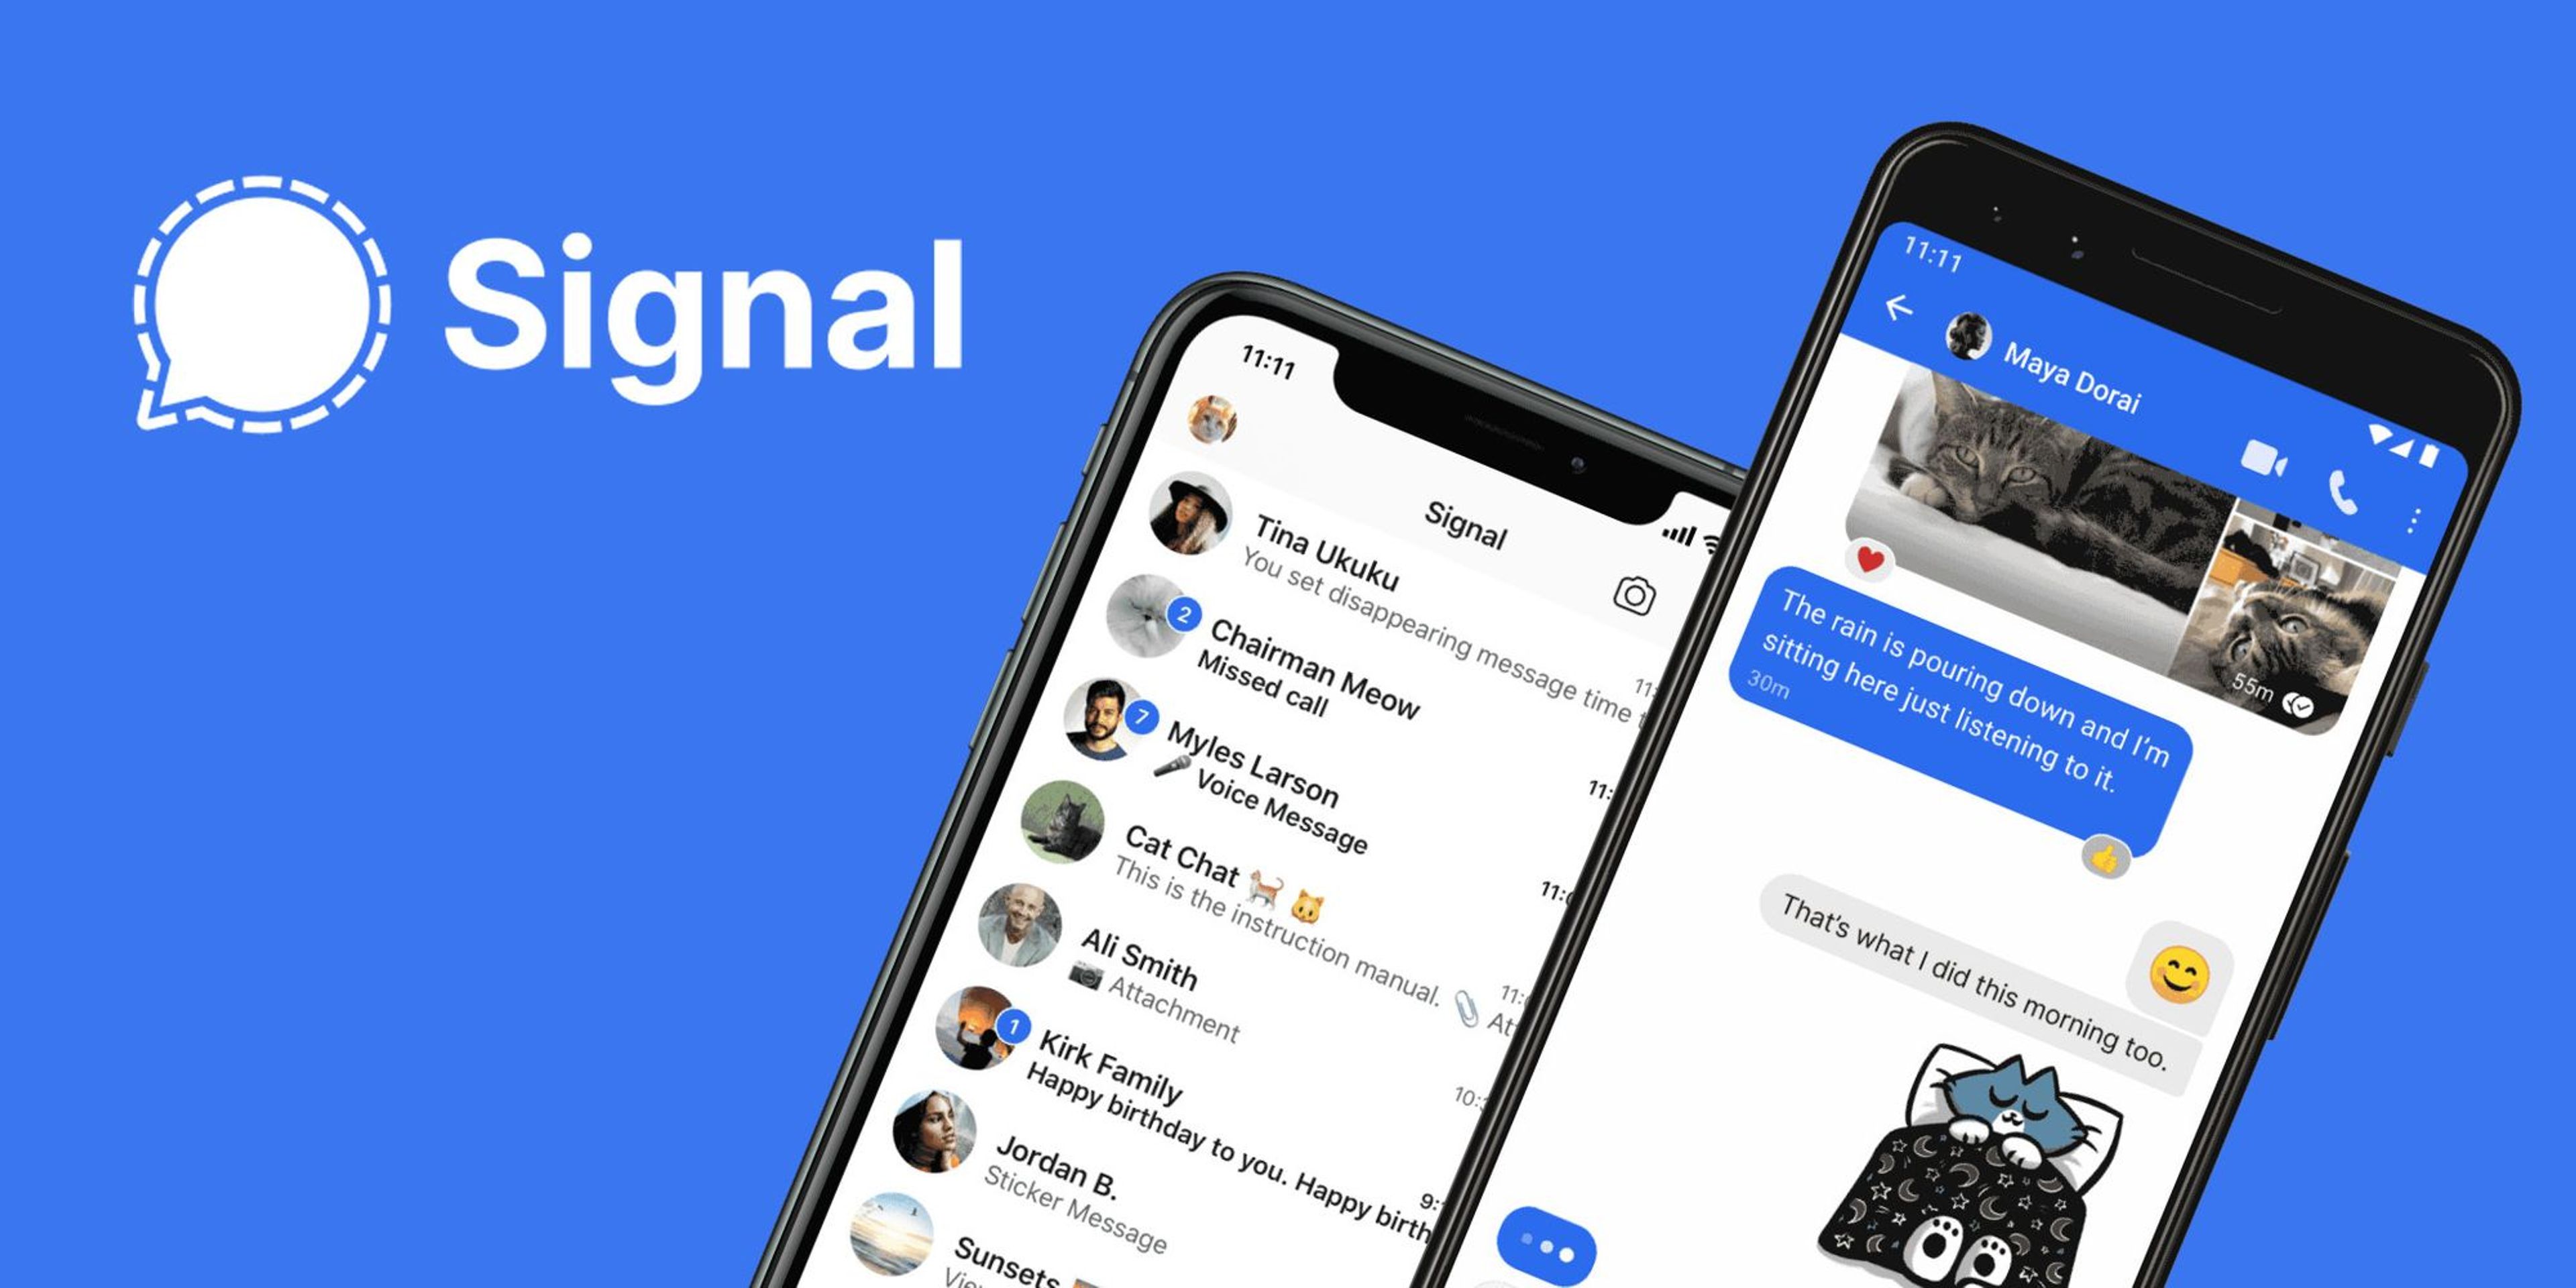 Image of the Signal app interface on a mobile phone